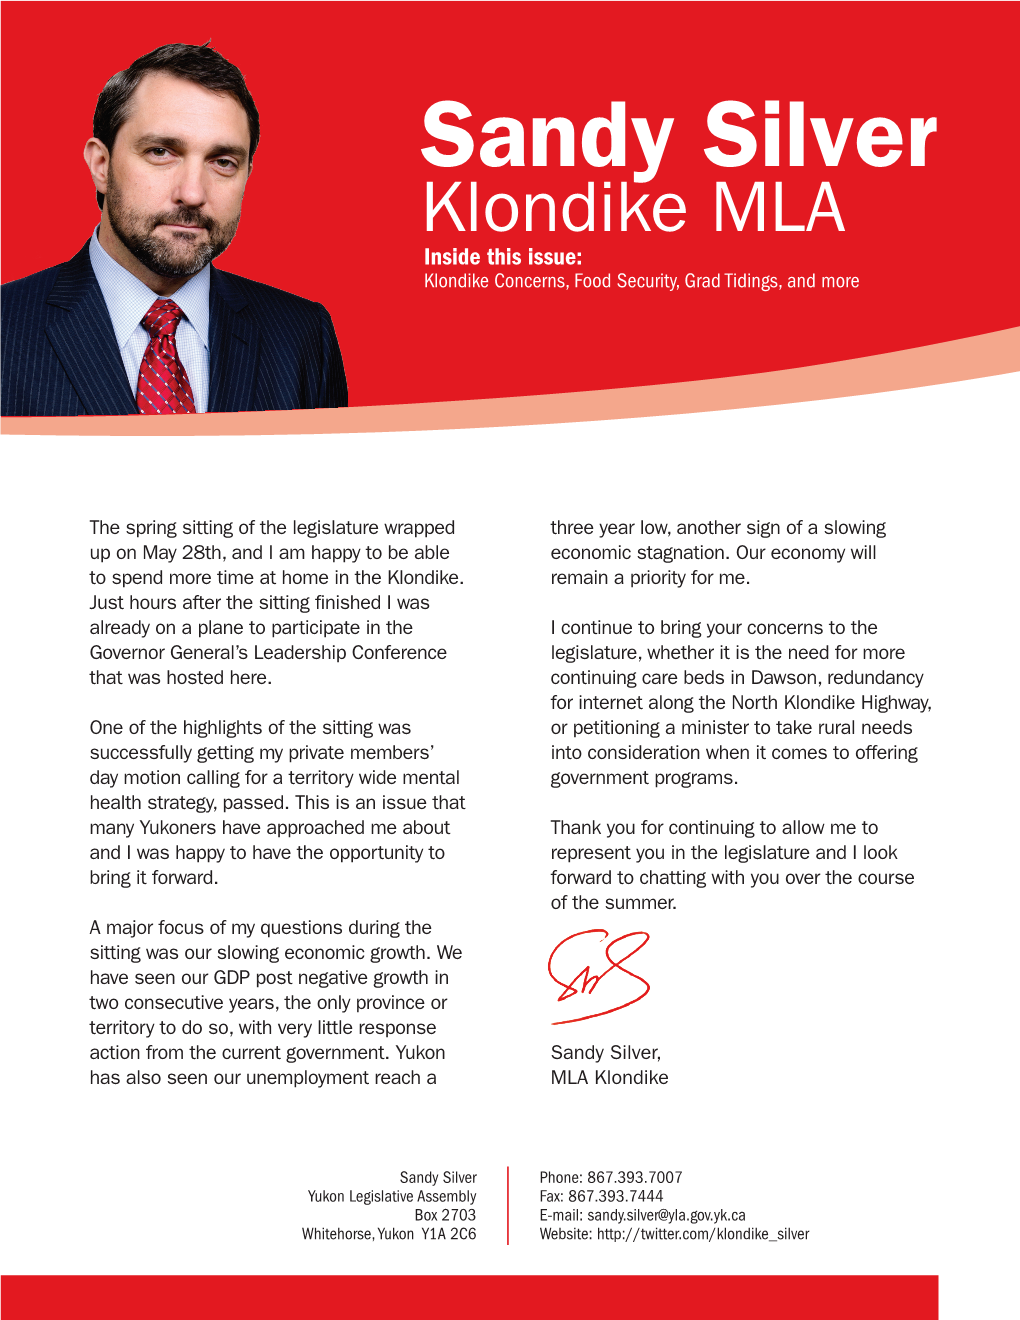 Sandy Silver Klondike MLA Inside This Issue: Klondike Concerns, Food Security, Grad Tidings, and More